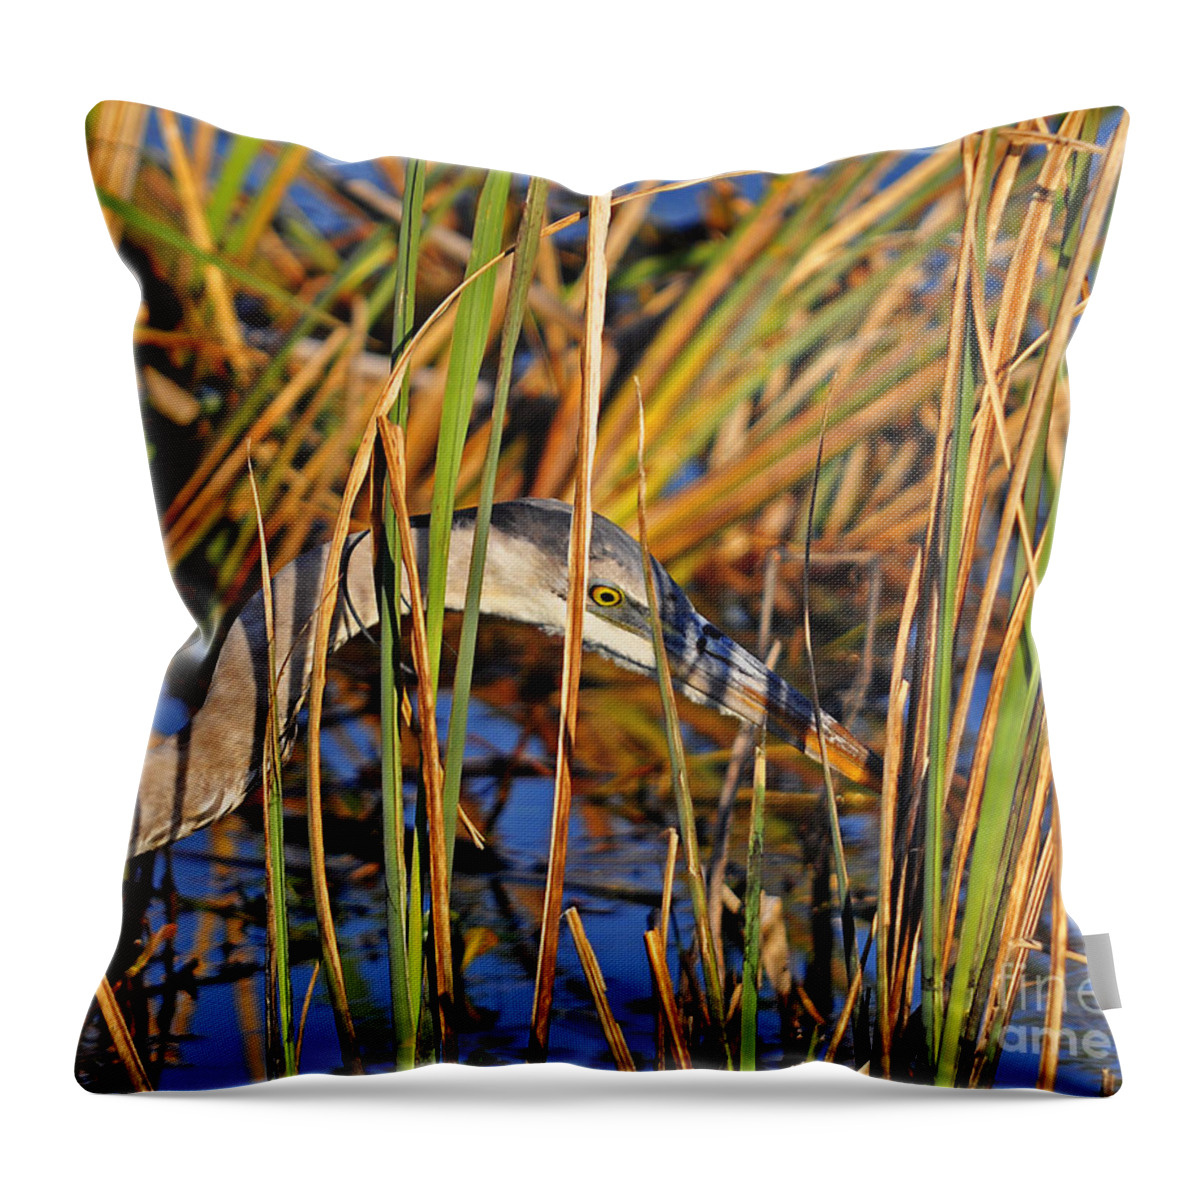 Heron Throw Pillow featuring the photograph Stealthy Stalker by Al Powell Photography USA